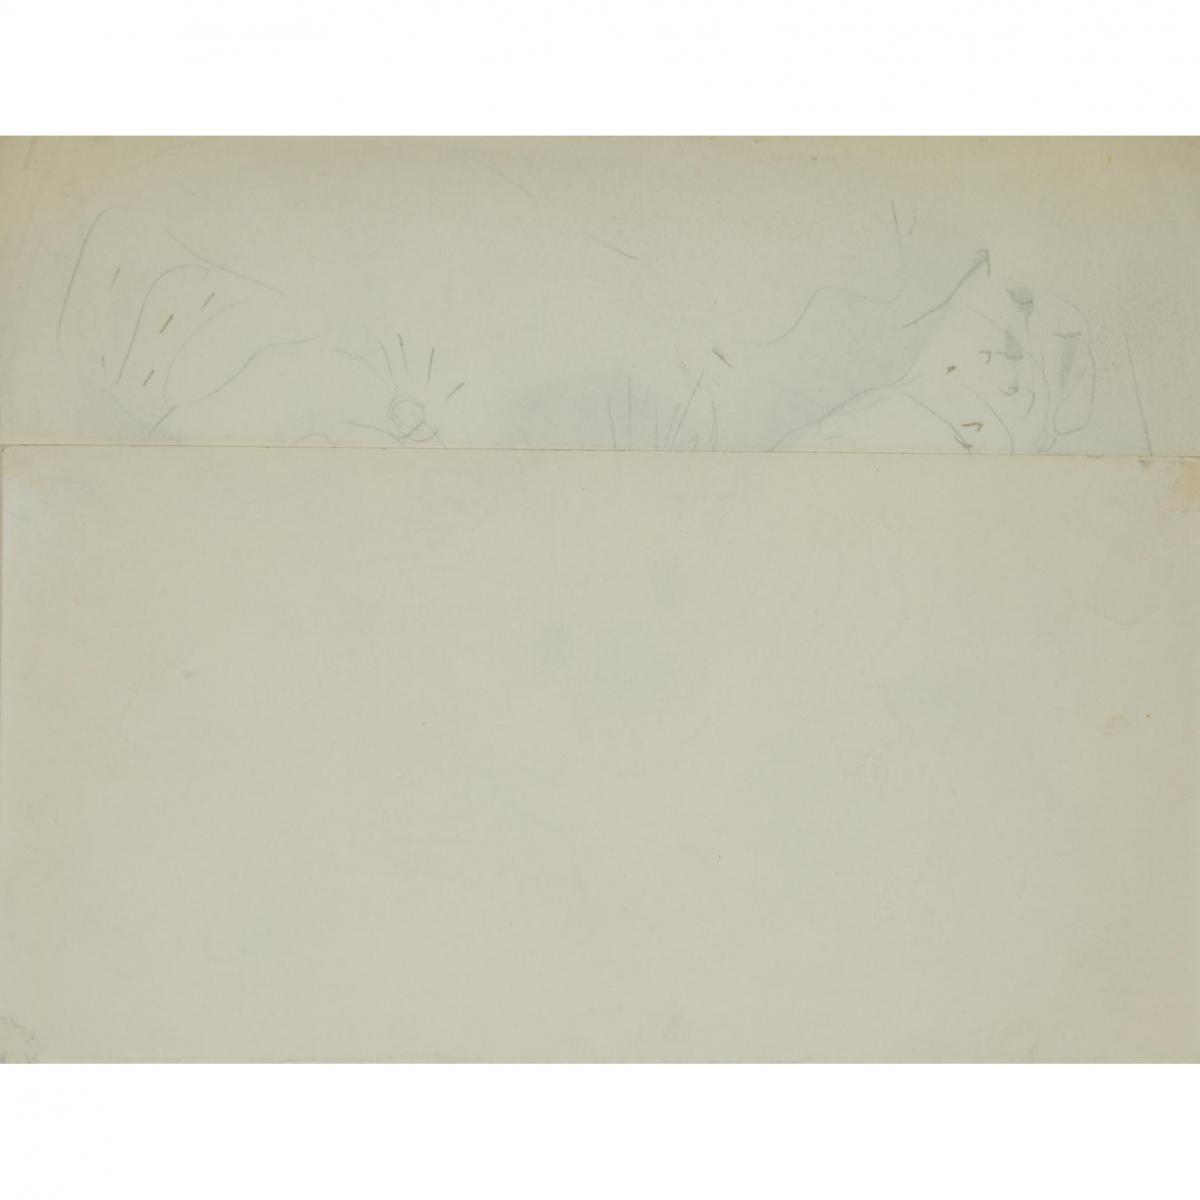 Various Artists, COLLECTION OF DRAWINGS, SOME 1956, Auguste François (Marie) Gorguet (1862-1927), Fr - Image 11 of 17